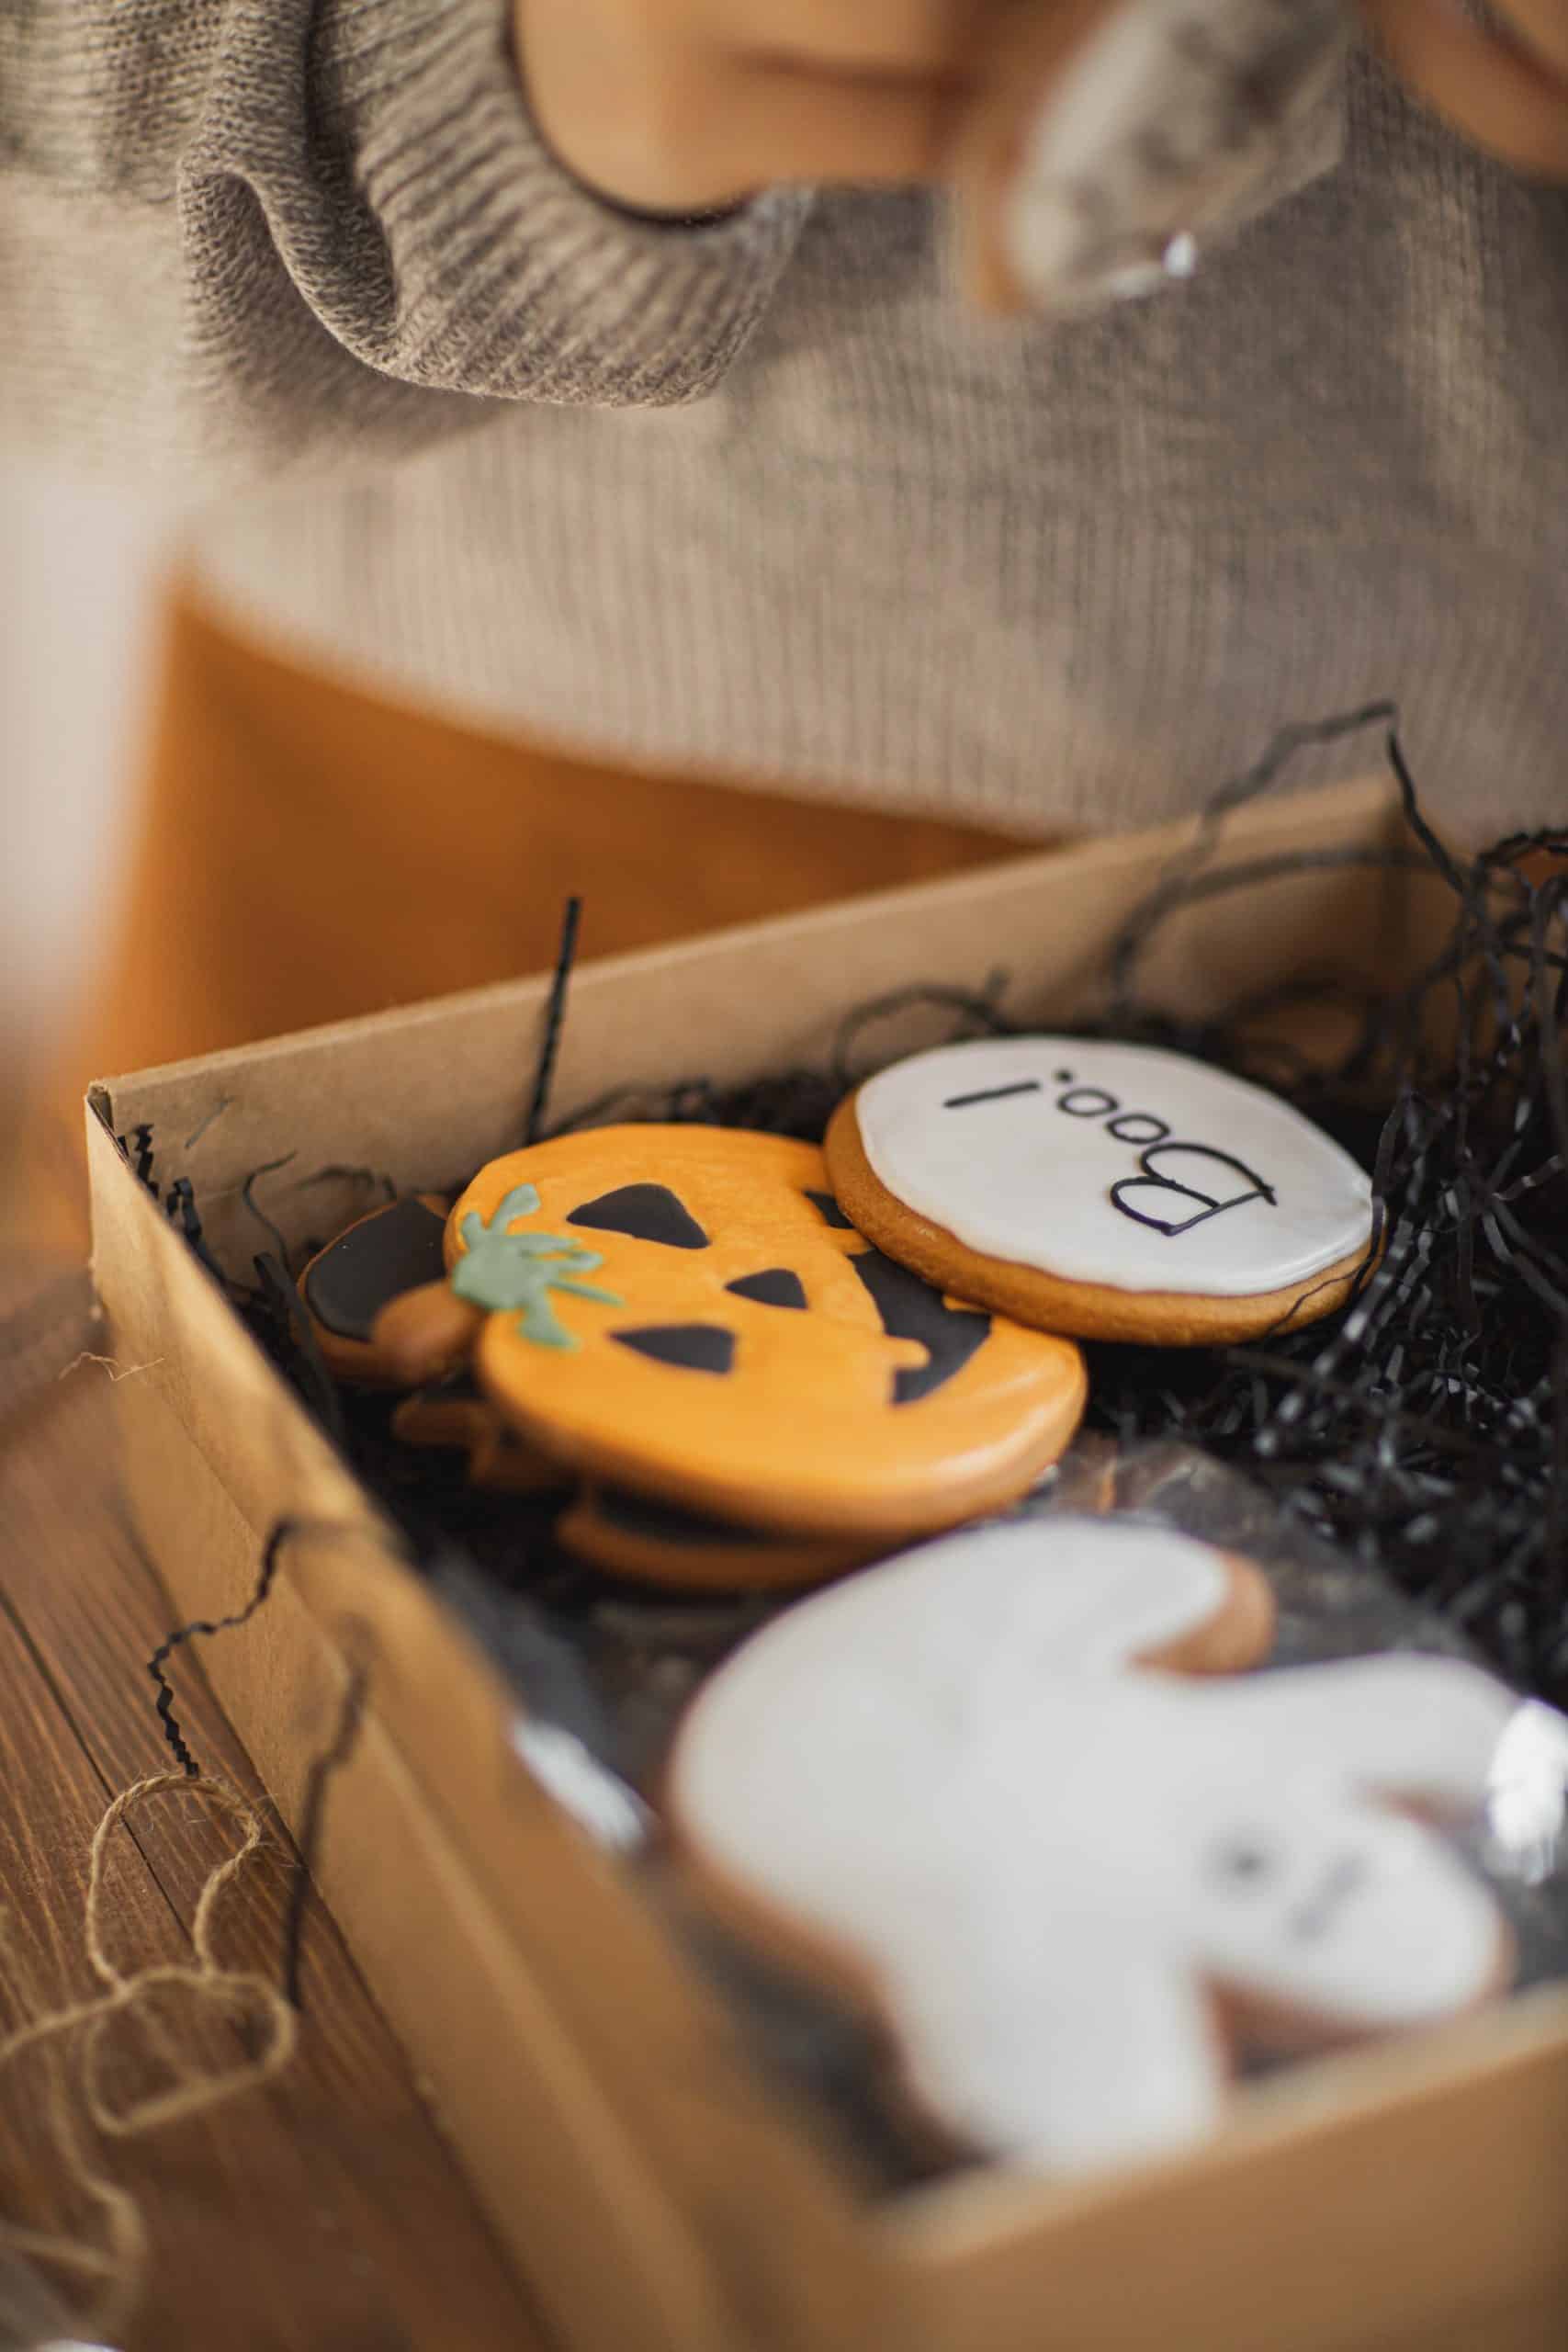 TikTok's latest trend for 'Boo baskets' can be filled with Halloween and autumn themed treats, toys and goodies